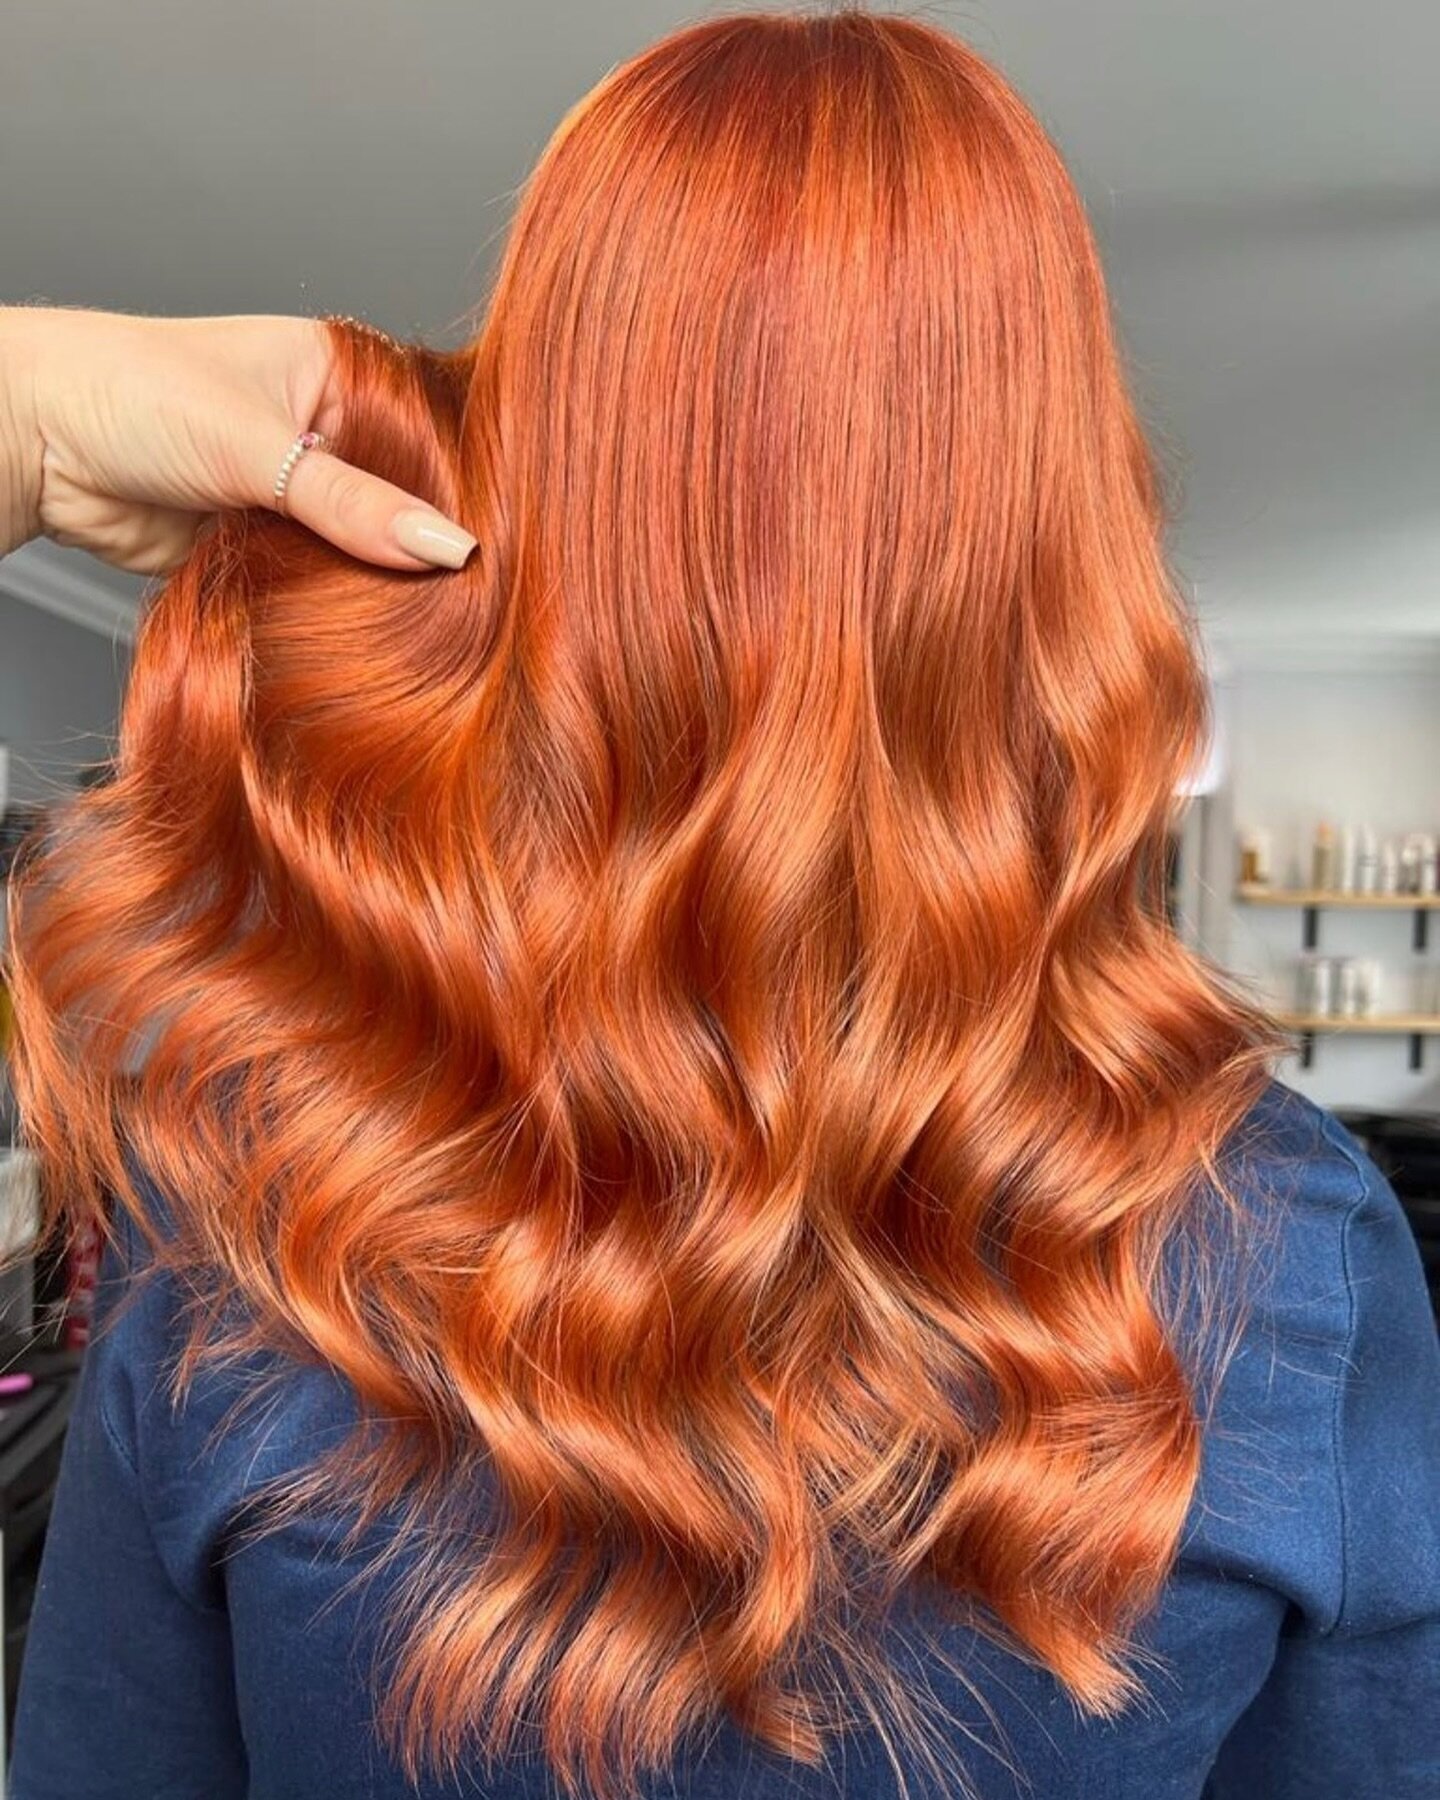 🧡🌶️ADD A BIT OF SPICE ..

Created by Maia
#CopperHair#CopperLocks#CopperTresses#CopperBalayage#CopperhairColor#CopperHairDontCare#CopperHairGoals#CopperHairInspo#CopperHairVibes#CopperHairEnvy